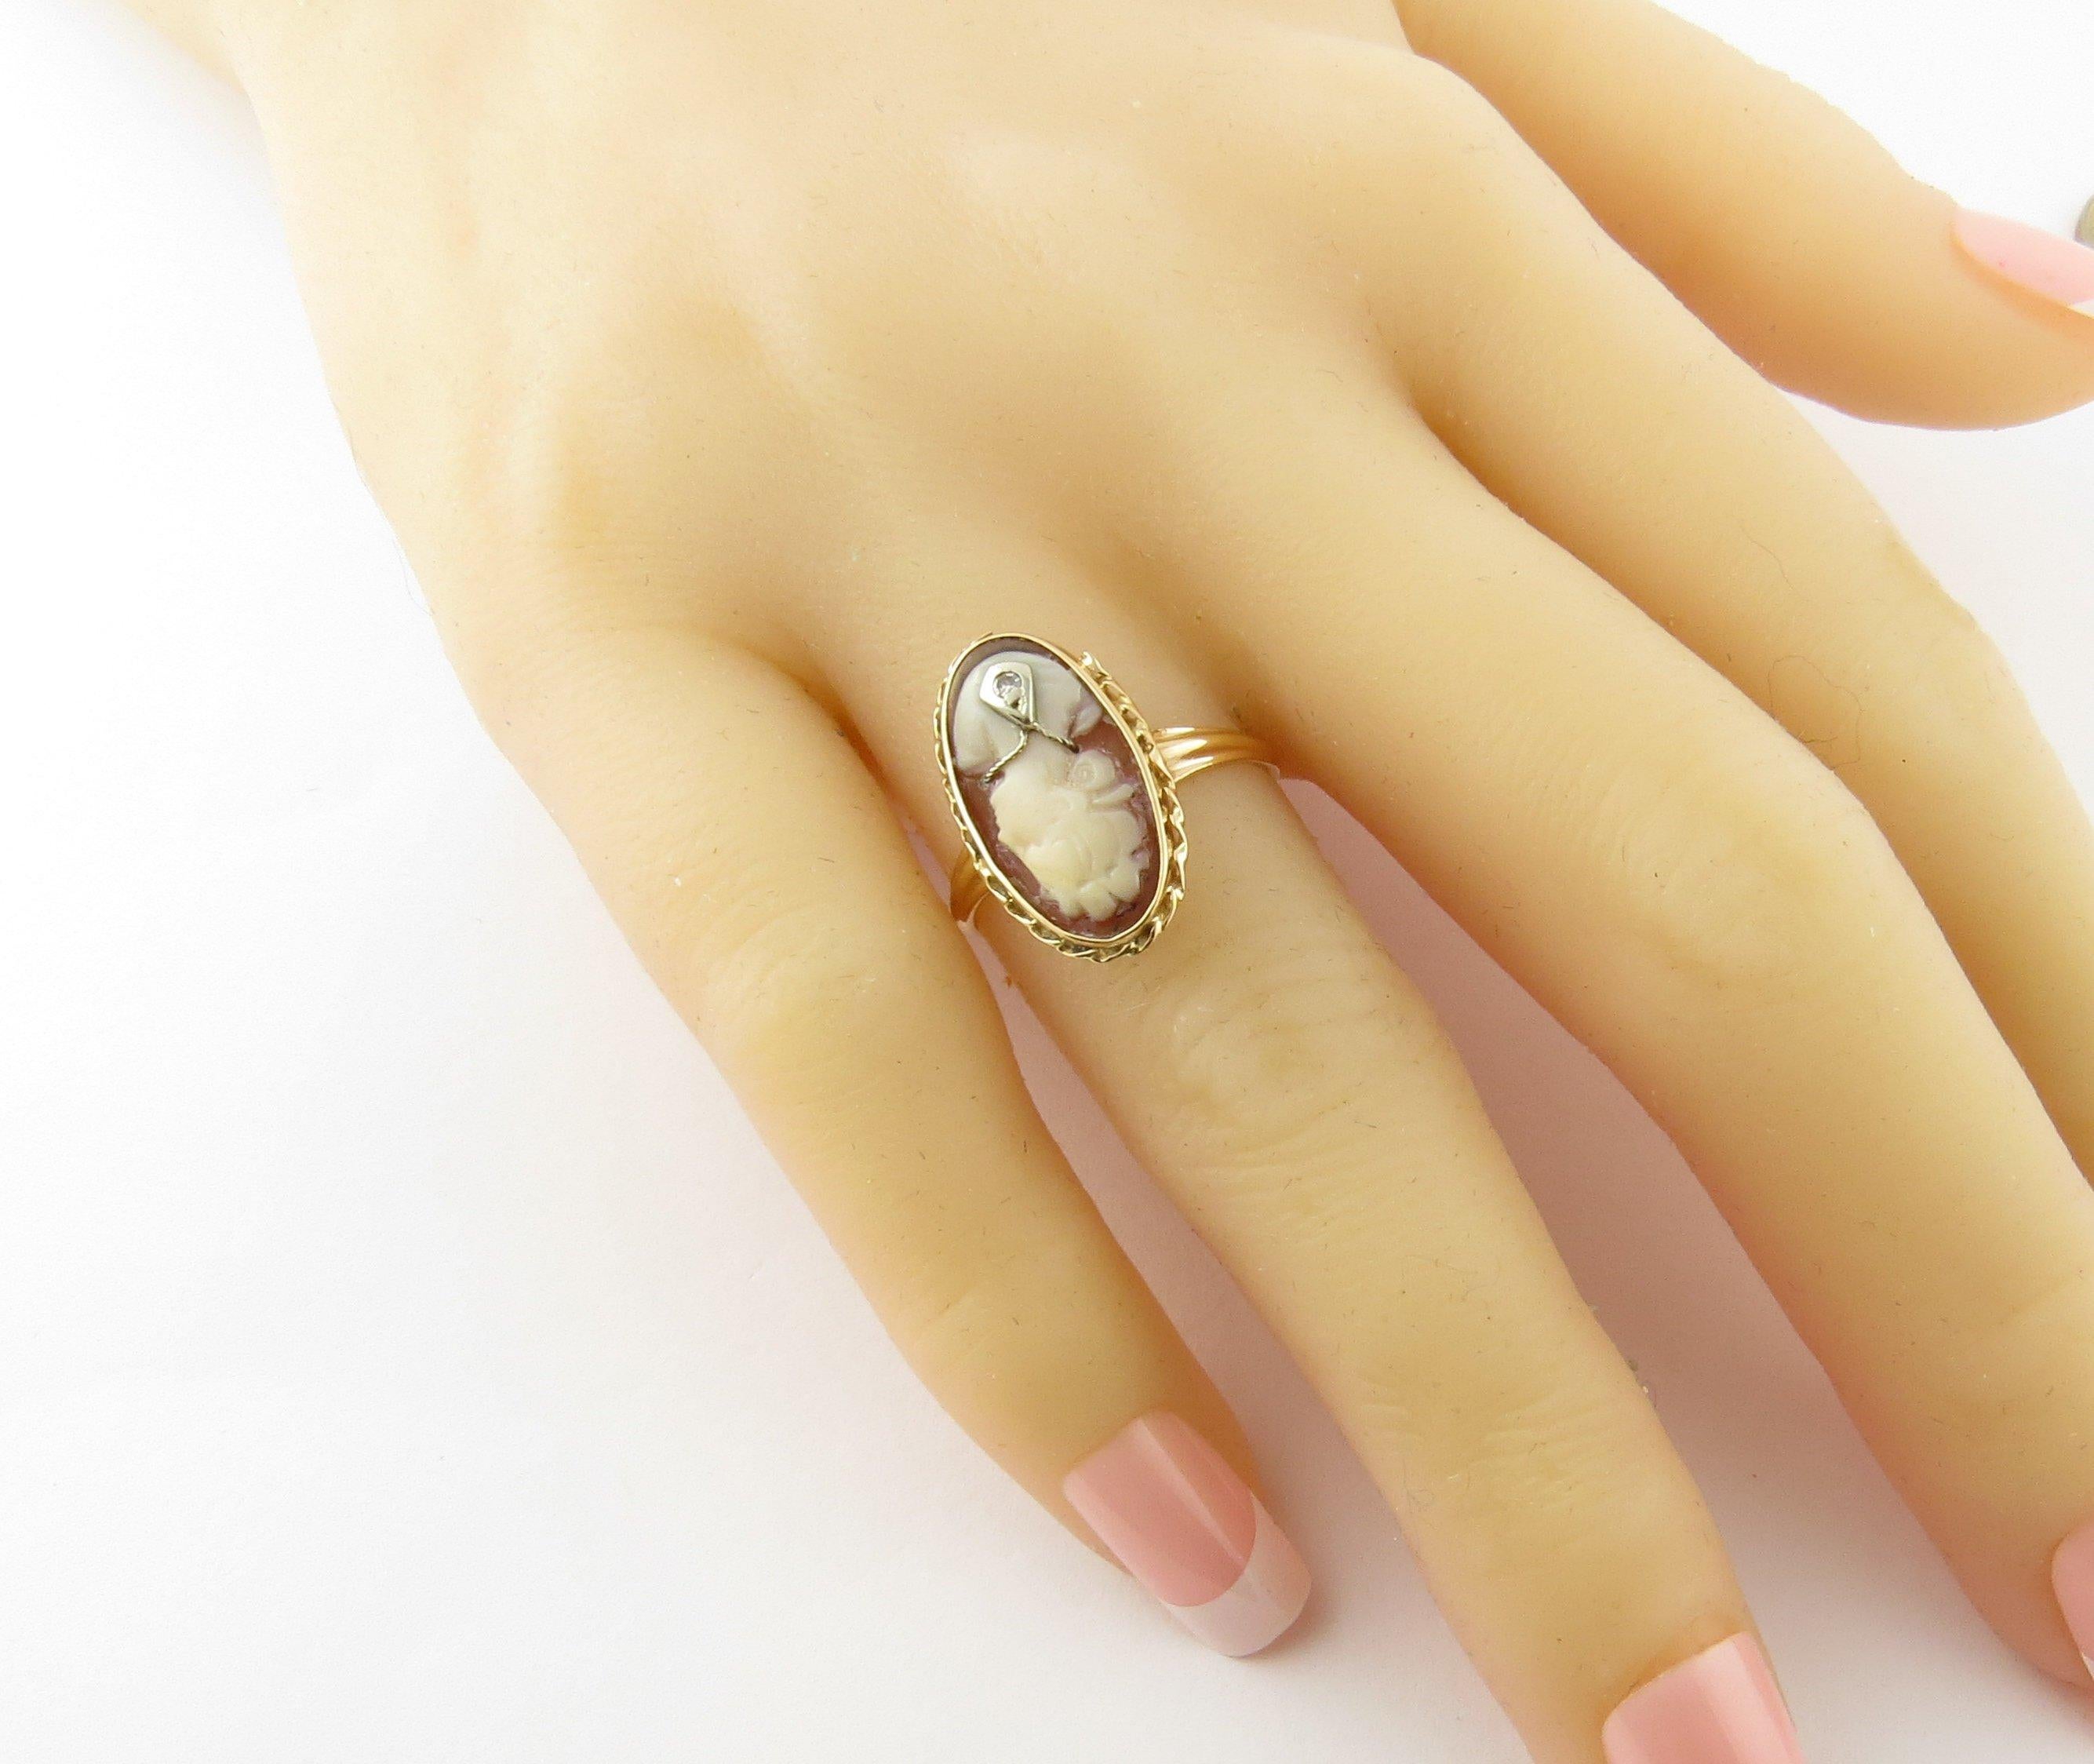 Vintage 14 Karat Yellow Gold and Diamond Cameo Ring Size 7.25. This lovely cameo ring features a lovely lady in profile accented with one single cut diamond and framed in classic 14K yellow gold. 
Top of ring measures 19 mm x 11 mm. Shank measures 2